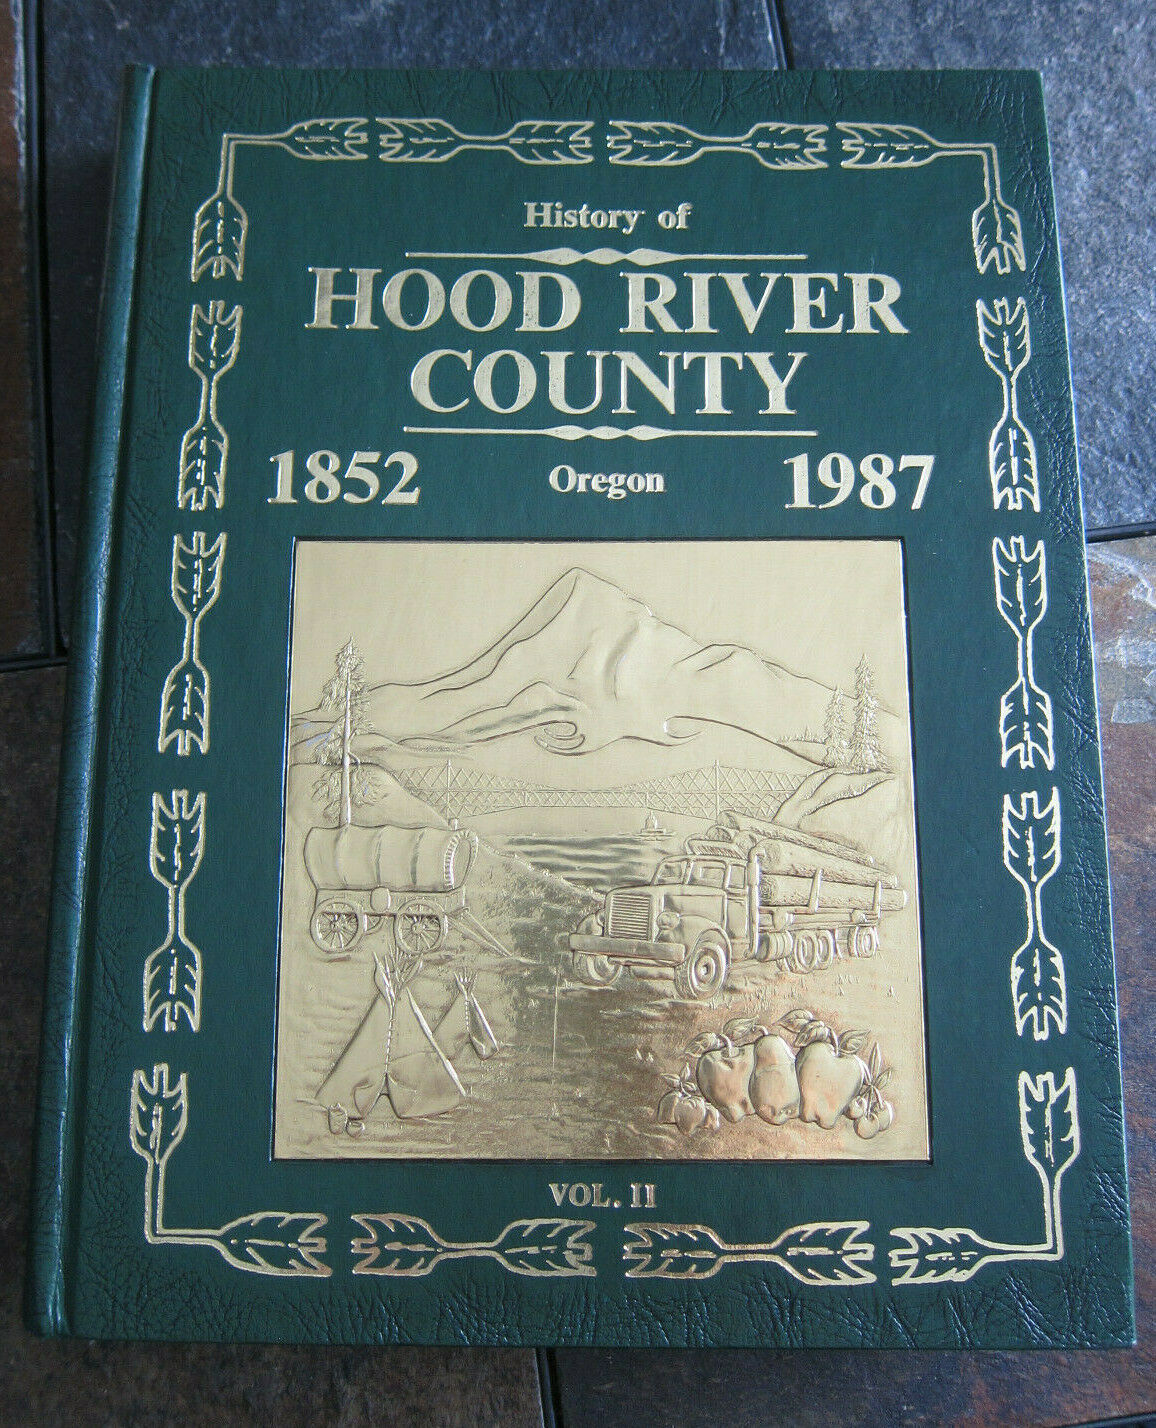 Hood River County, Oregon Cascade Locks Odell Parkdale Or Family History Book